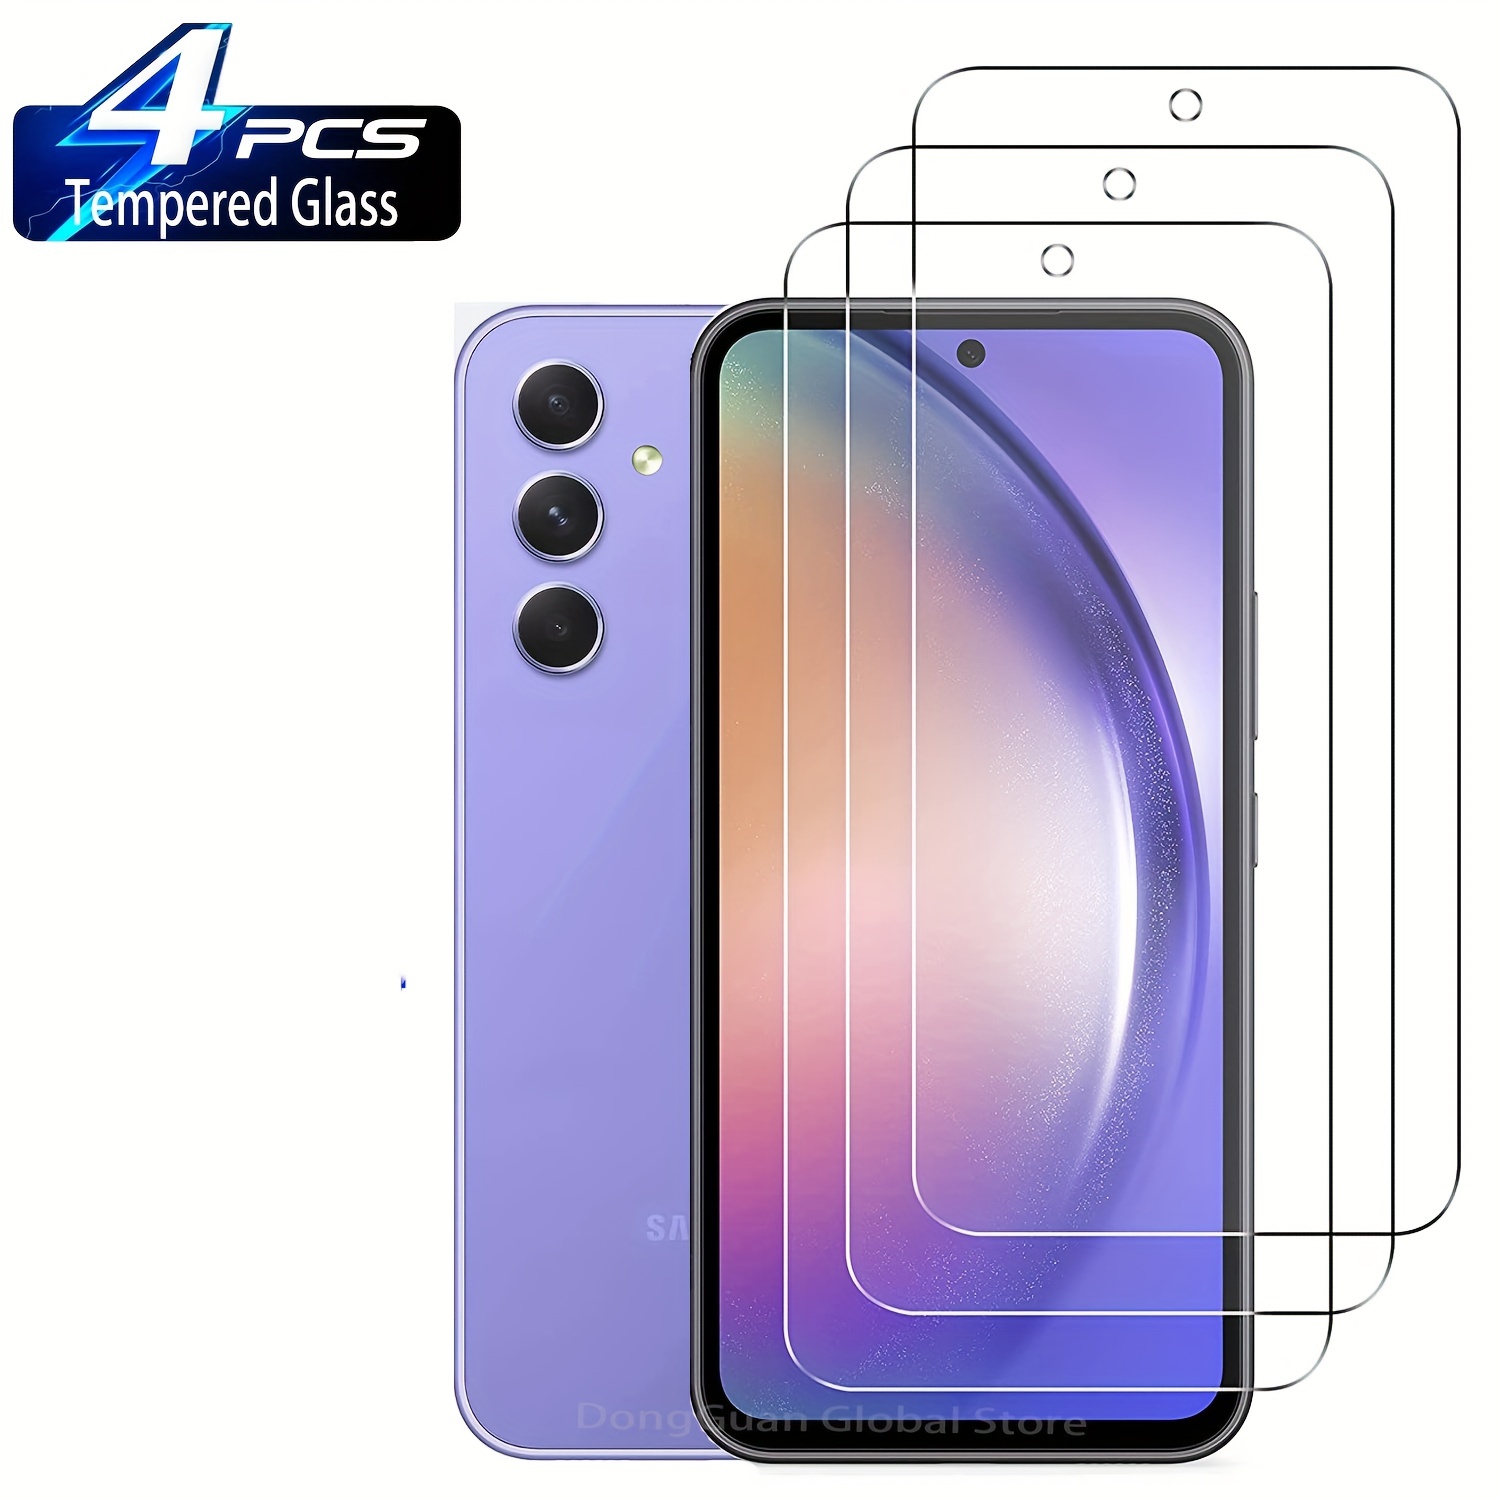 

4pcs Screen Protector Tempered Glass Film Fall Resistant Glass Compatible For Galaxy A14/a13/a13 5g/a14 5g/a02s/a03s/a03/a12/a23/a24/a33/a51/a52/a53 5g/a54 5g/s21/s21+/s22/s22+/23/s23+/s23 Fe 5g